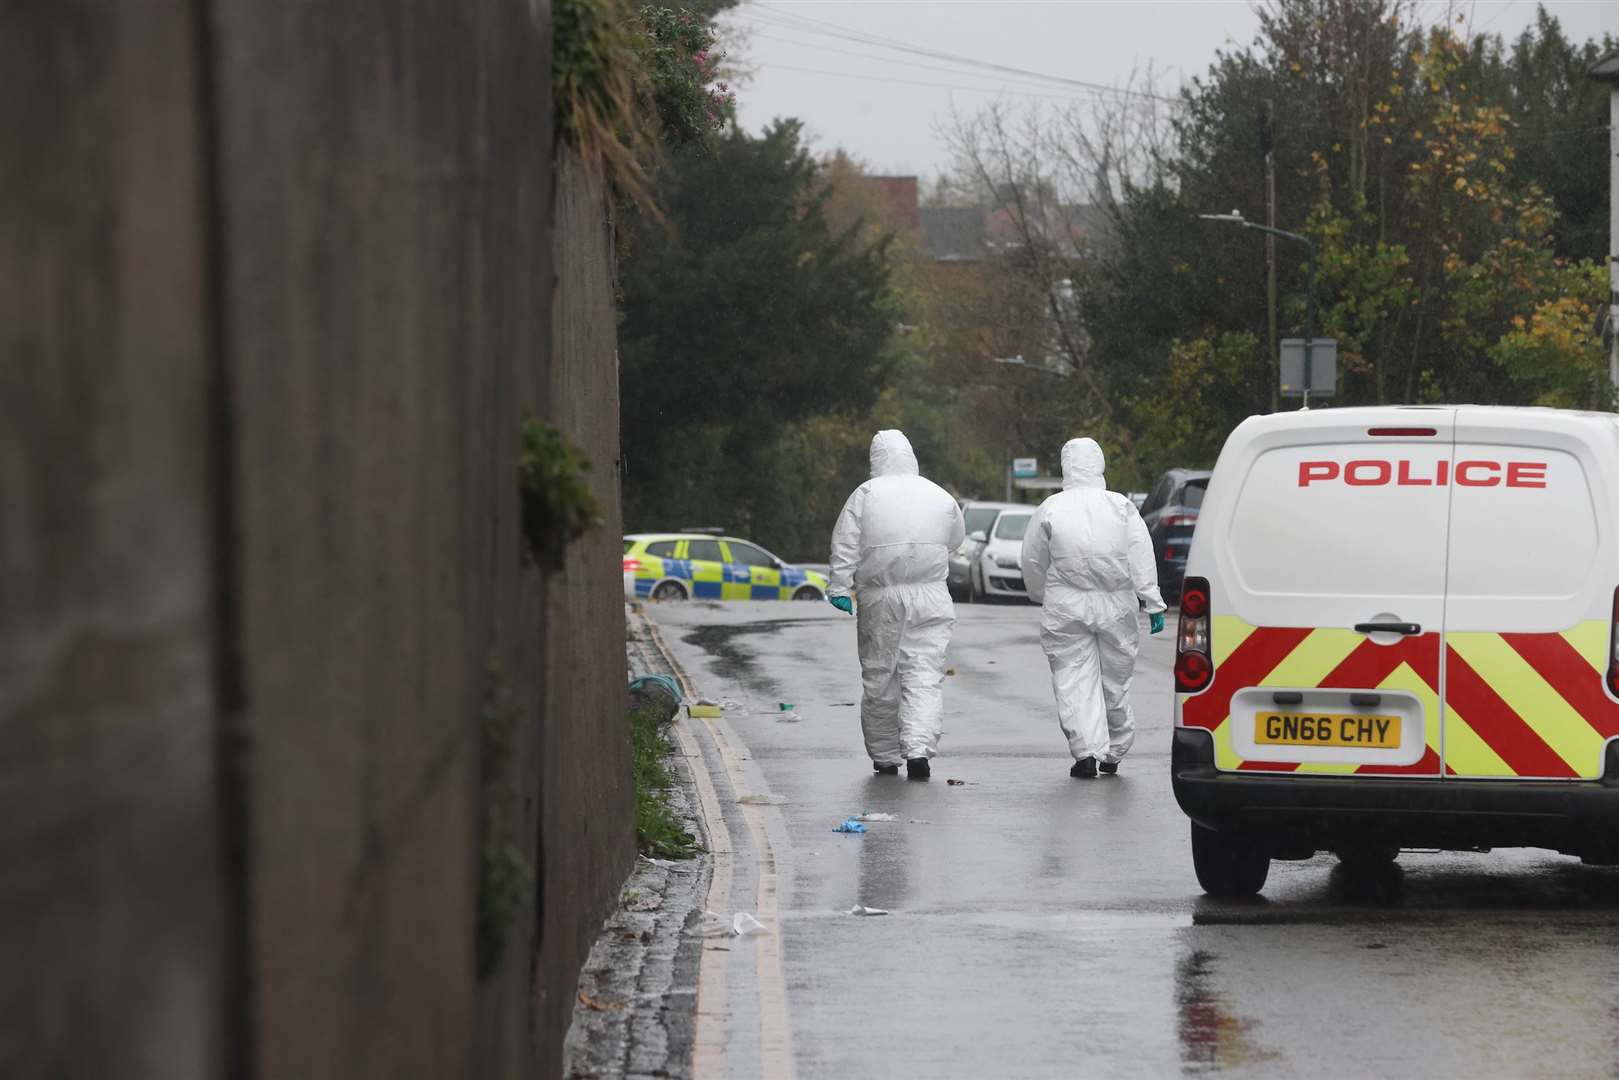 Forensic officers at the scene of a serious assault in Borstal Street, Borstal, last month